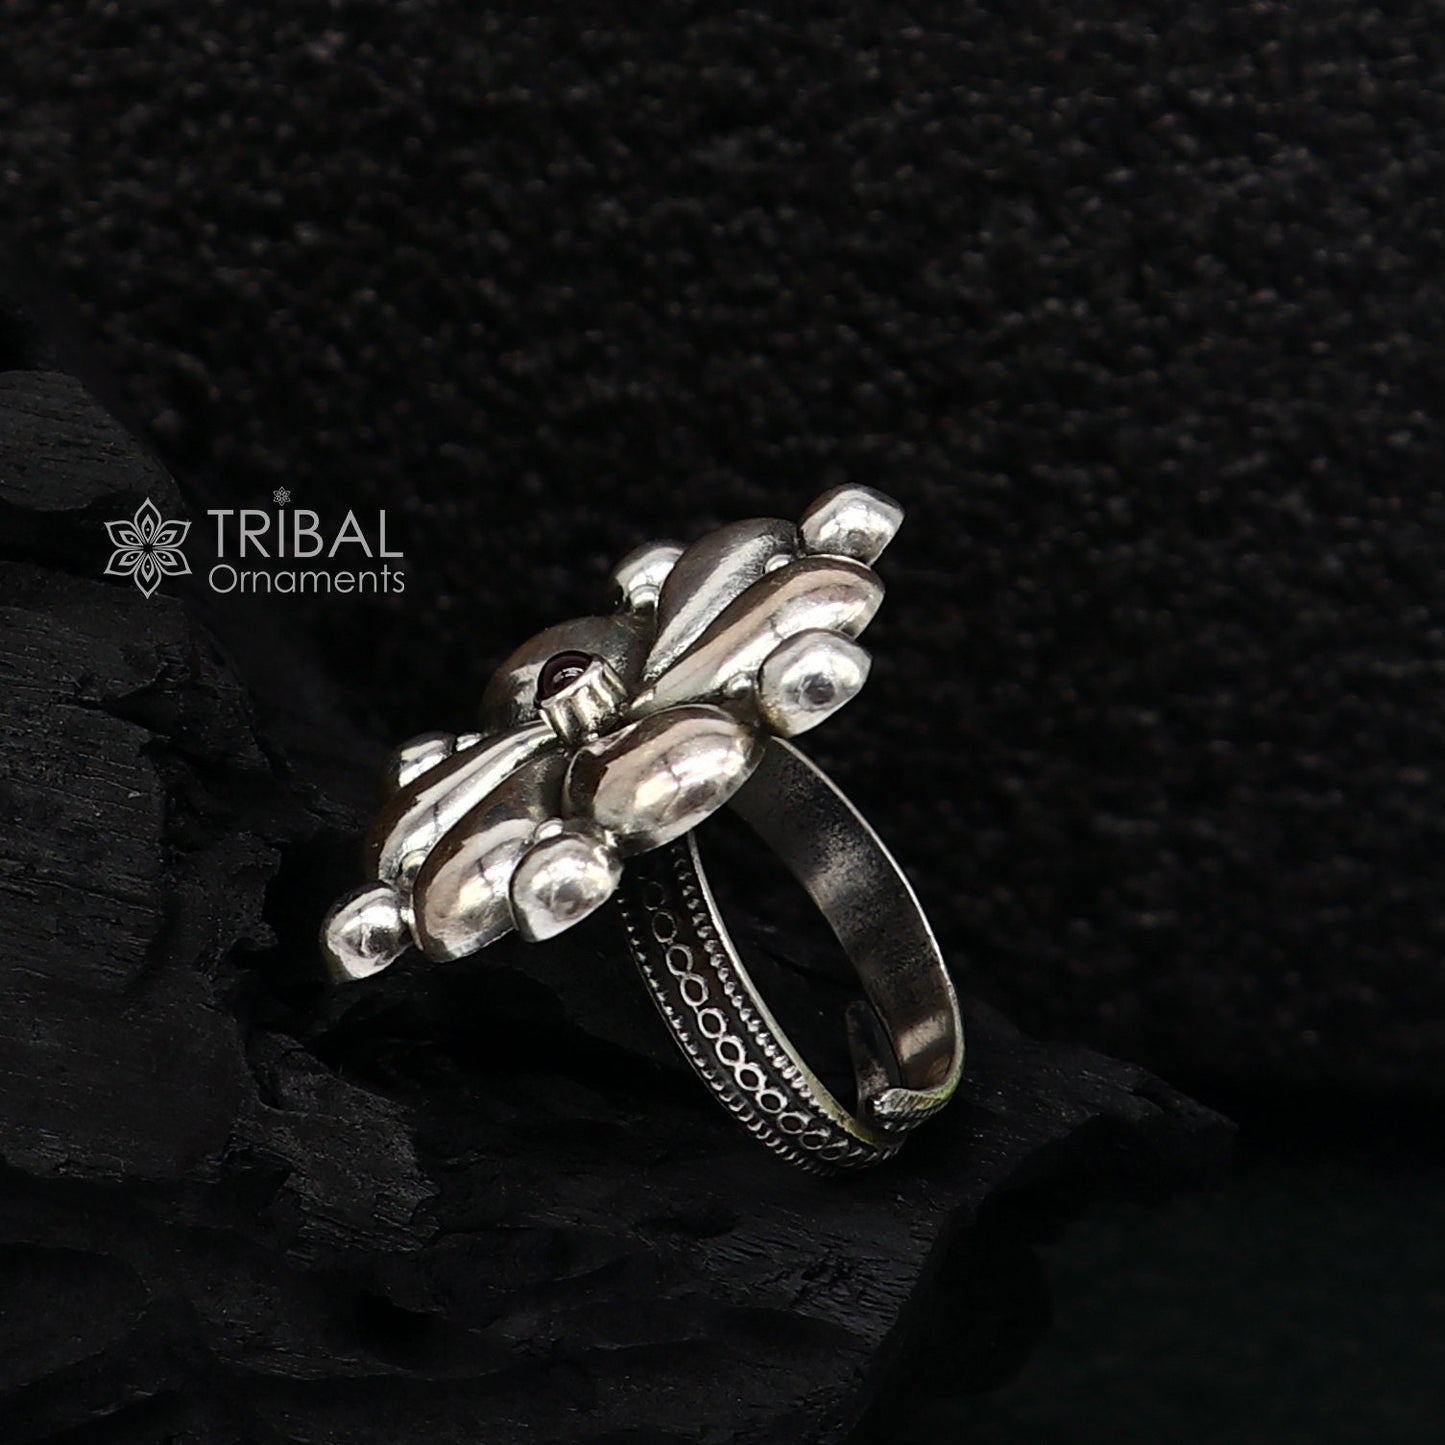 Indian Cultural design handmade silver fabulous vintage adjustable ring with amazing design indian tribal belly dance jewelry sr396 - TRIBAL ORNAMENTS